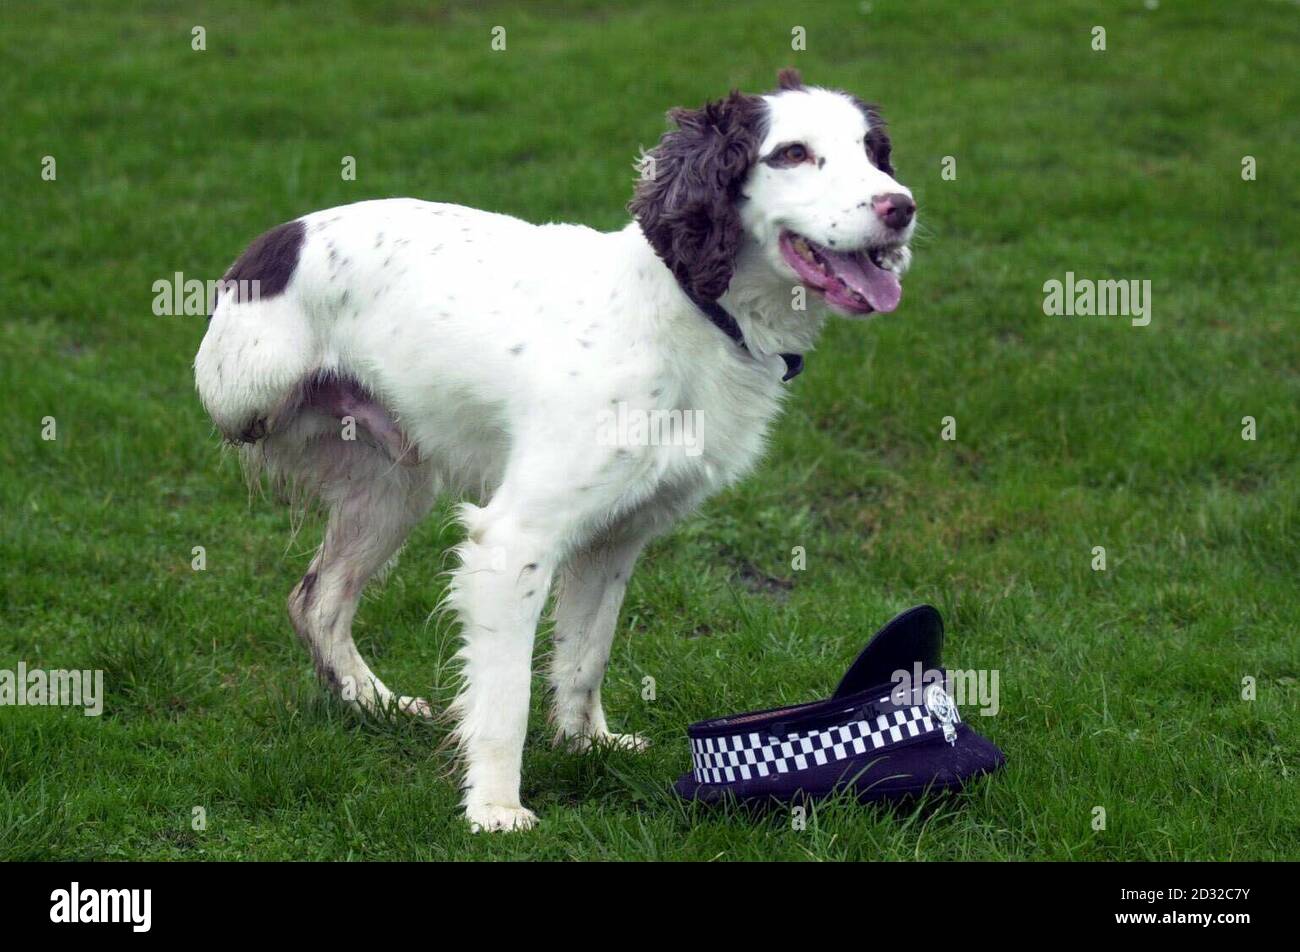 'Snoopy' the police sniffer dog is back in action, following a leg amputation. The seven-year-old English springer spaniel had to have an arthritic infected leg removed before Christmas, but has now made a full recovery and is back in service.  *   with the Wiltshire Police Force, based at the dog section in Devizes. Stock Photo